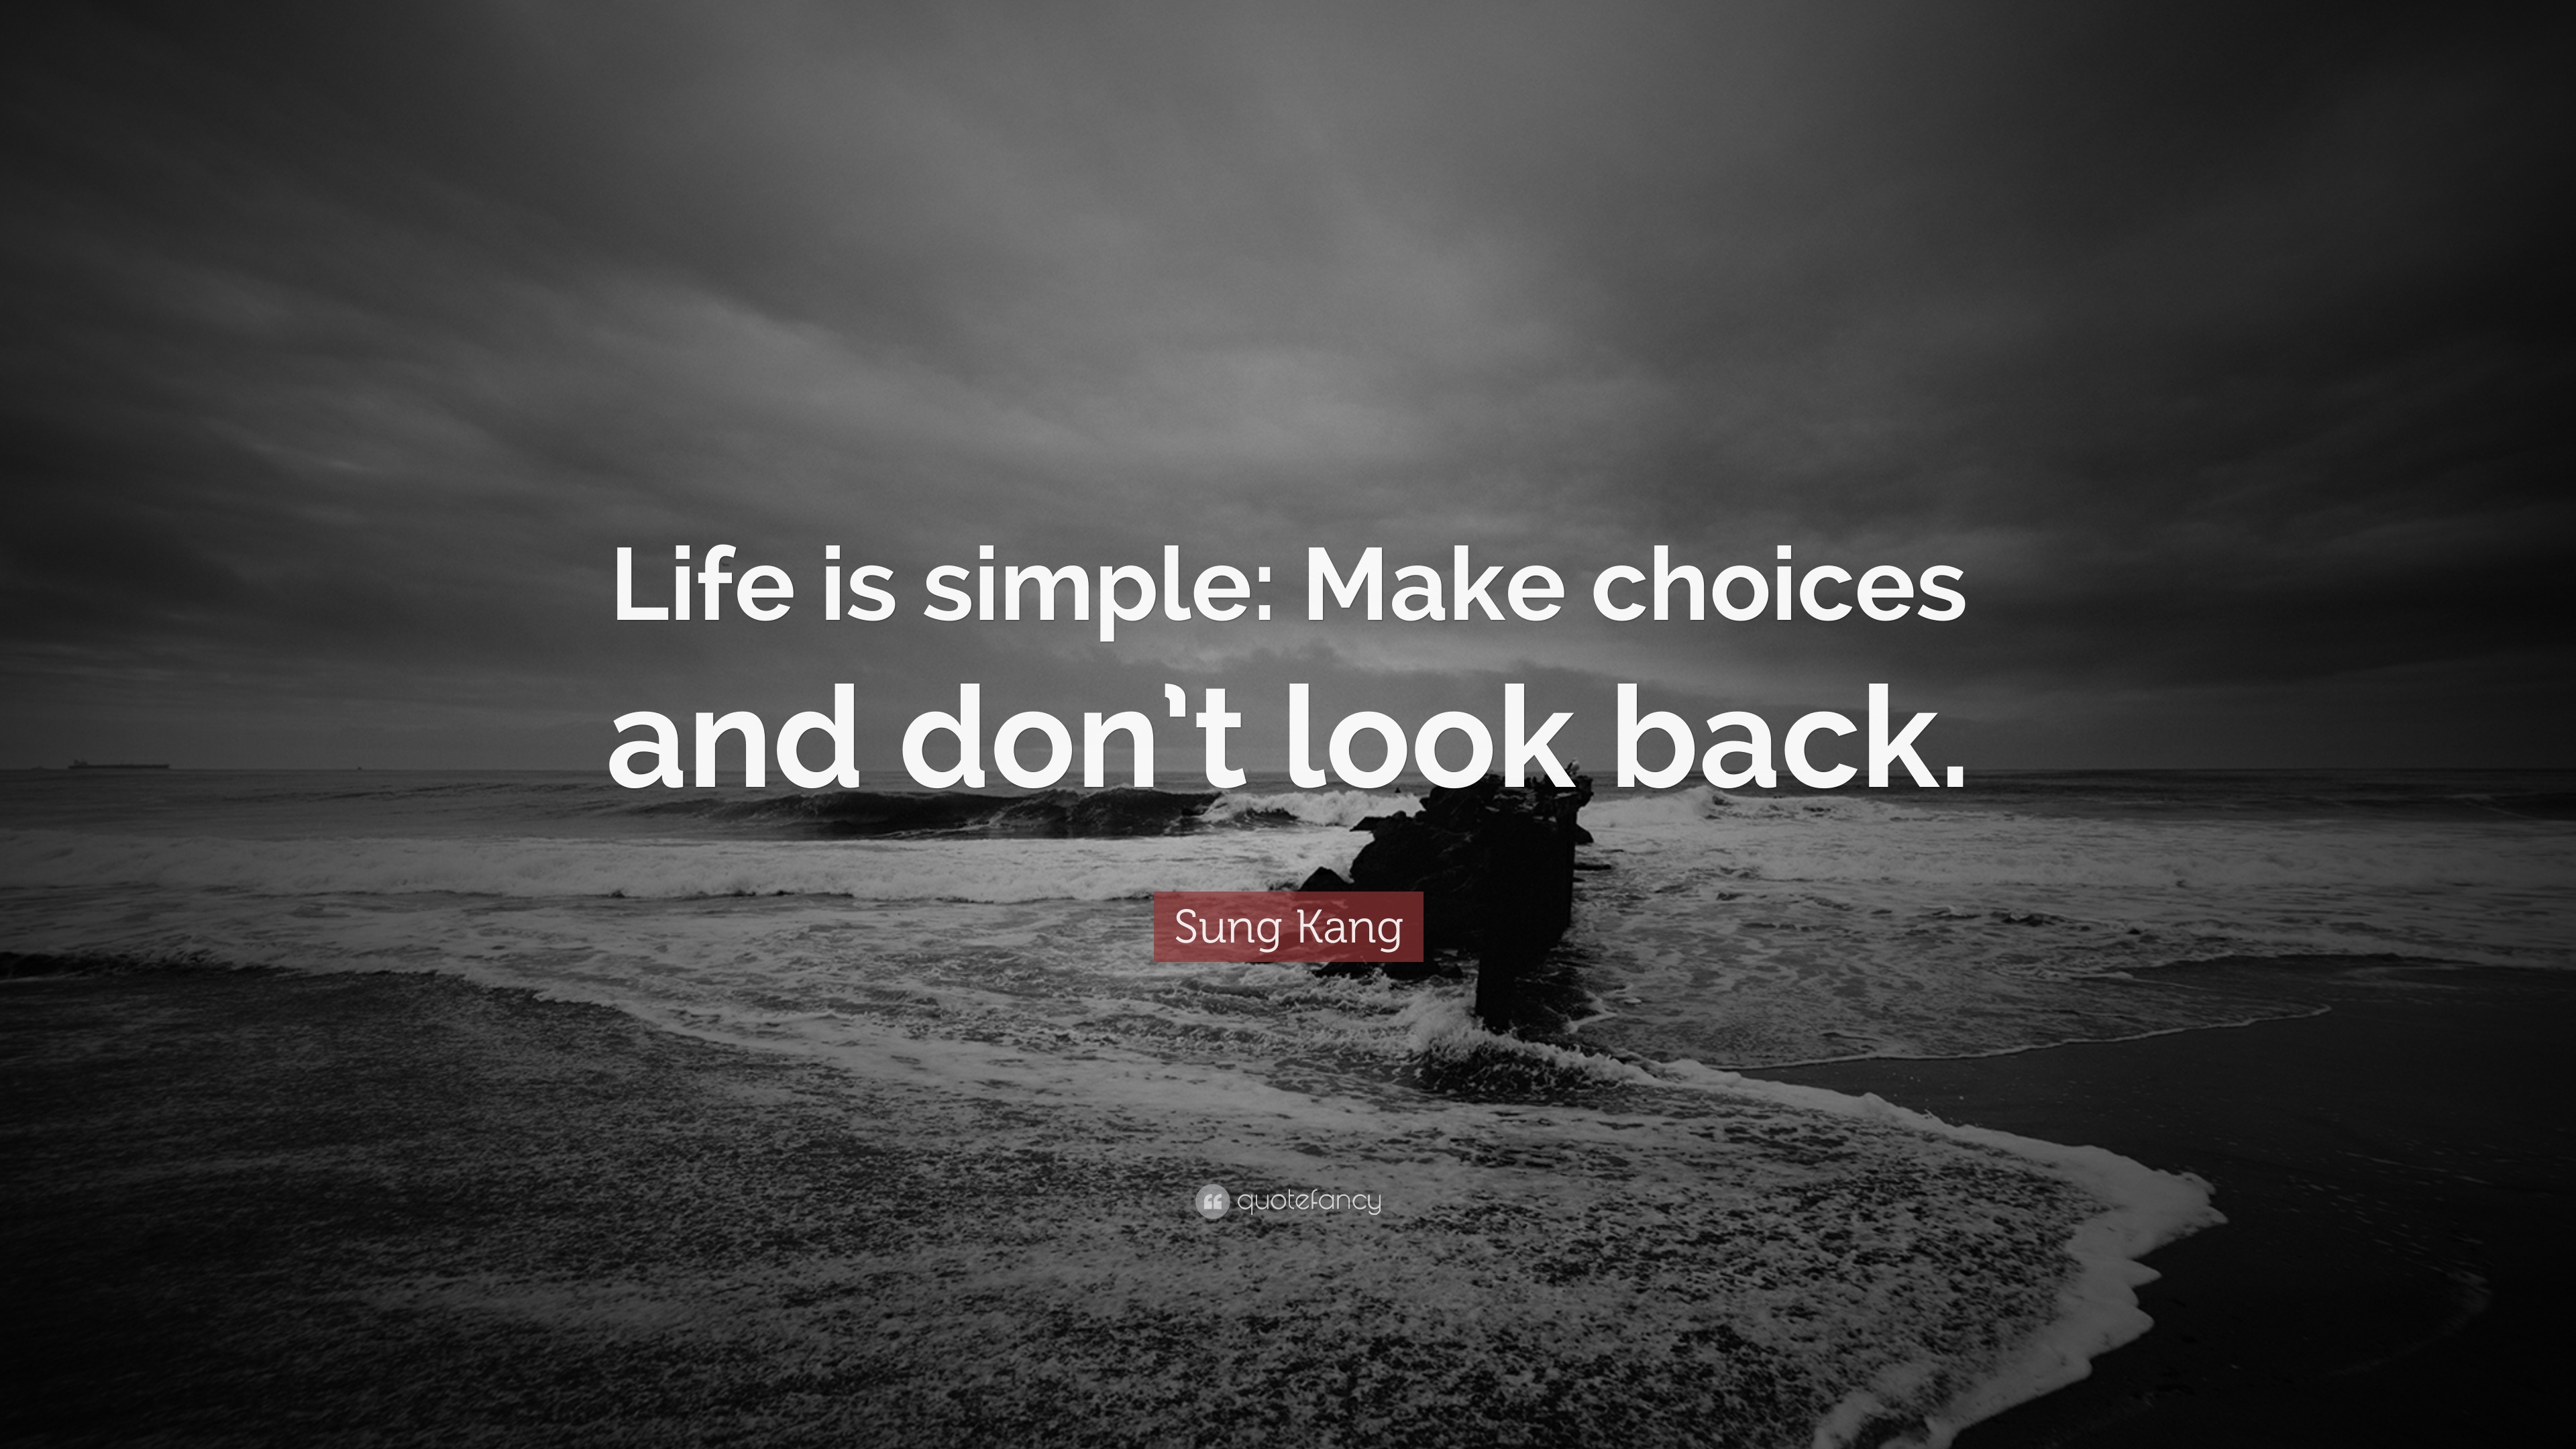 https://quotefancy.com/media/wallpaper/3840x2160/4691821-Sung-Kang-Quote-Life-is-simple-Make-choices-and-don-t-look-back.jpg